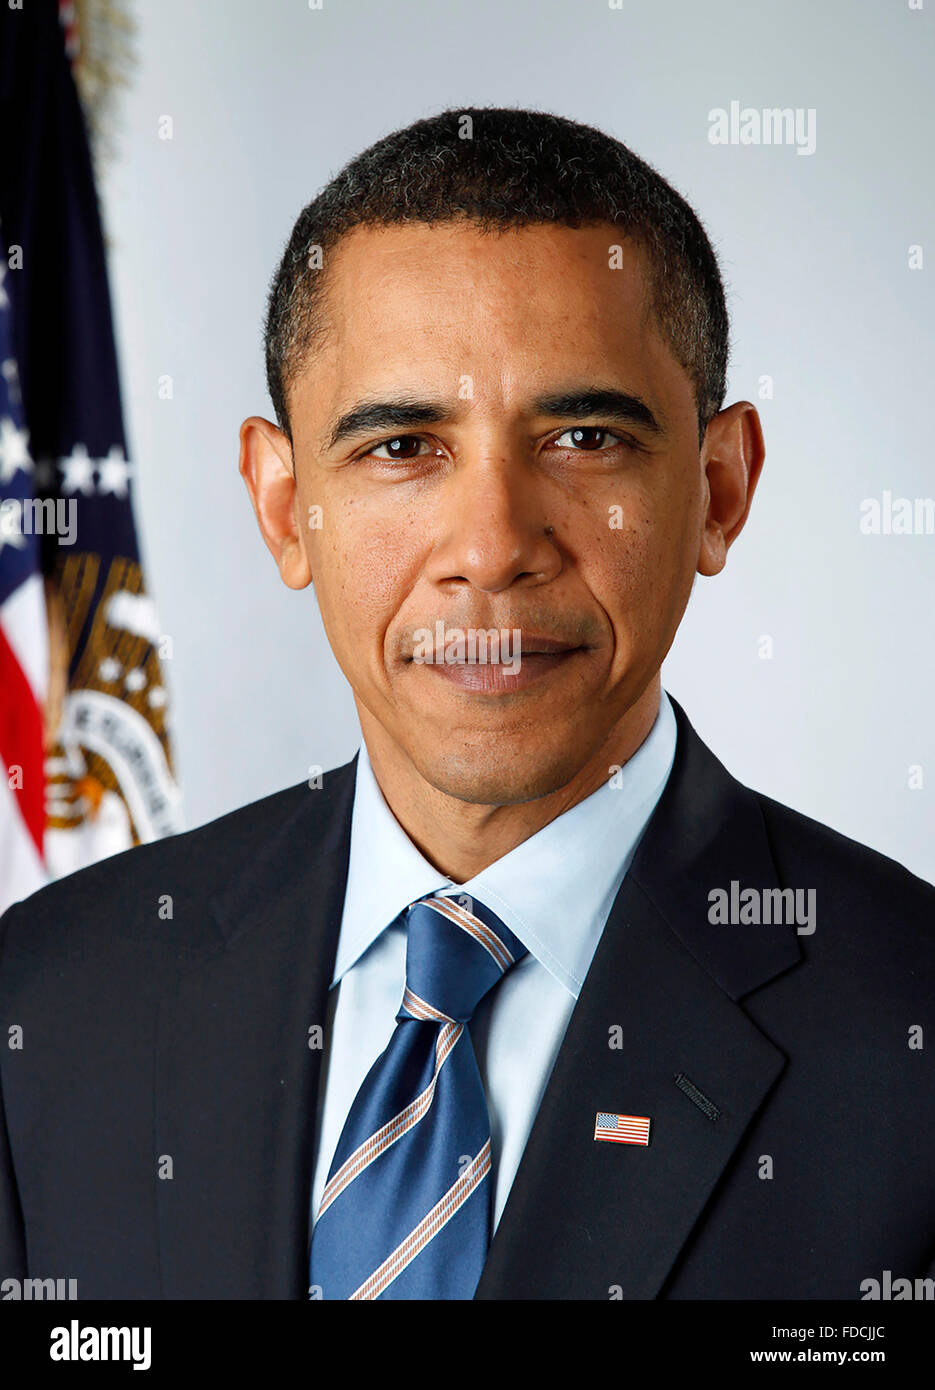 Barack Obama. Official portrait of Barack Obama (b.1961), the 44th President of the USA, taken on January 13th 2009, when he was President Elect and a week before he assumed office. Stock Photo